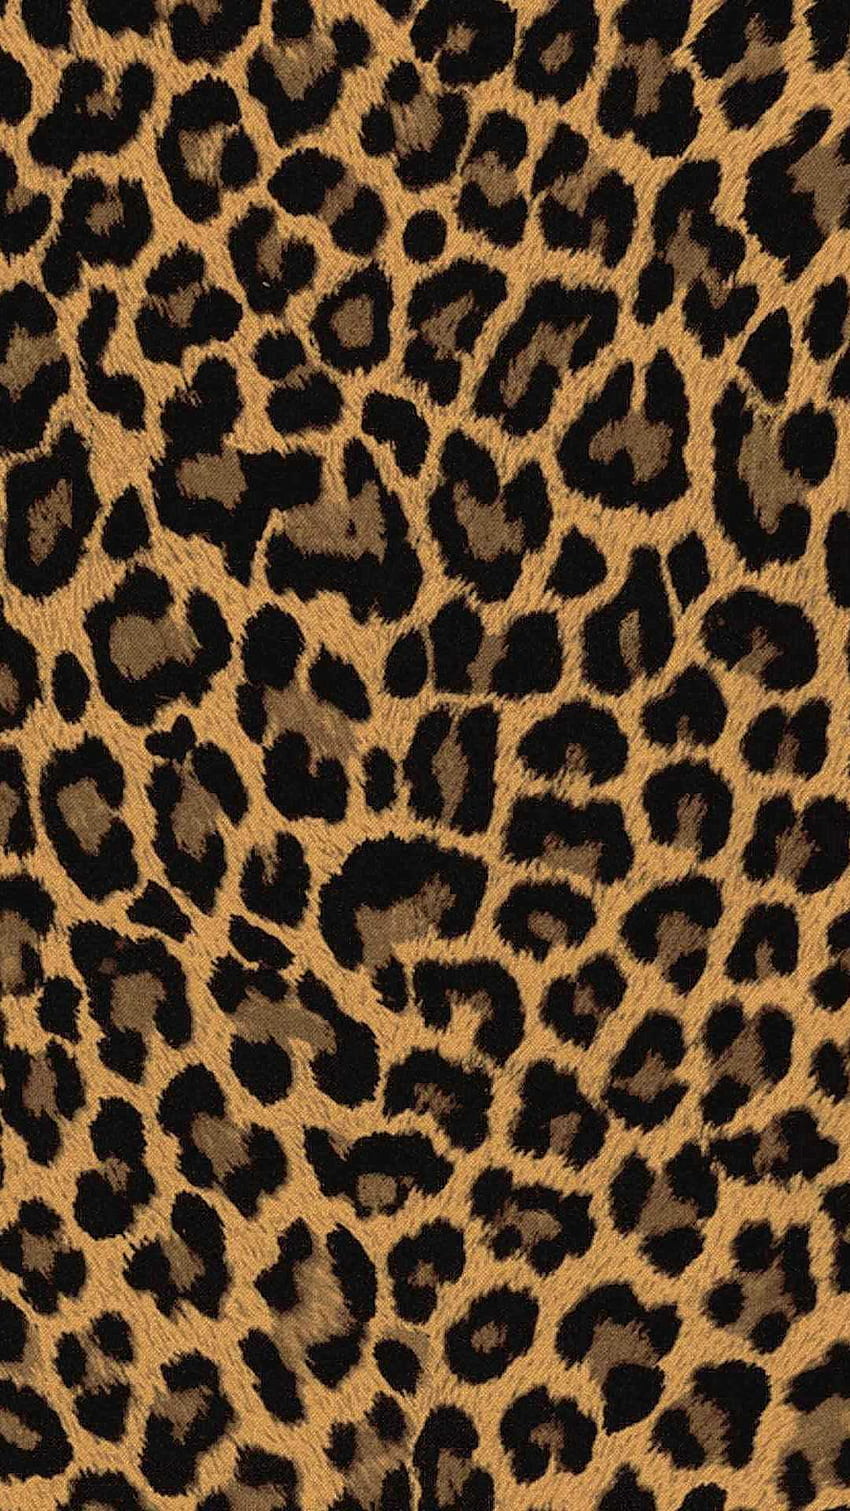 iPhone Leopard Print - Awesome HD phone wallpaper